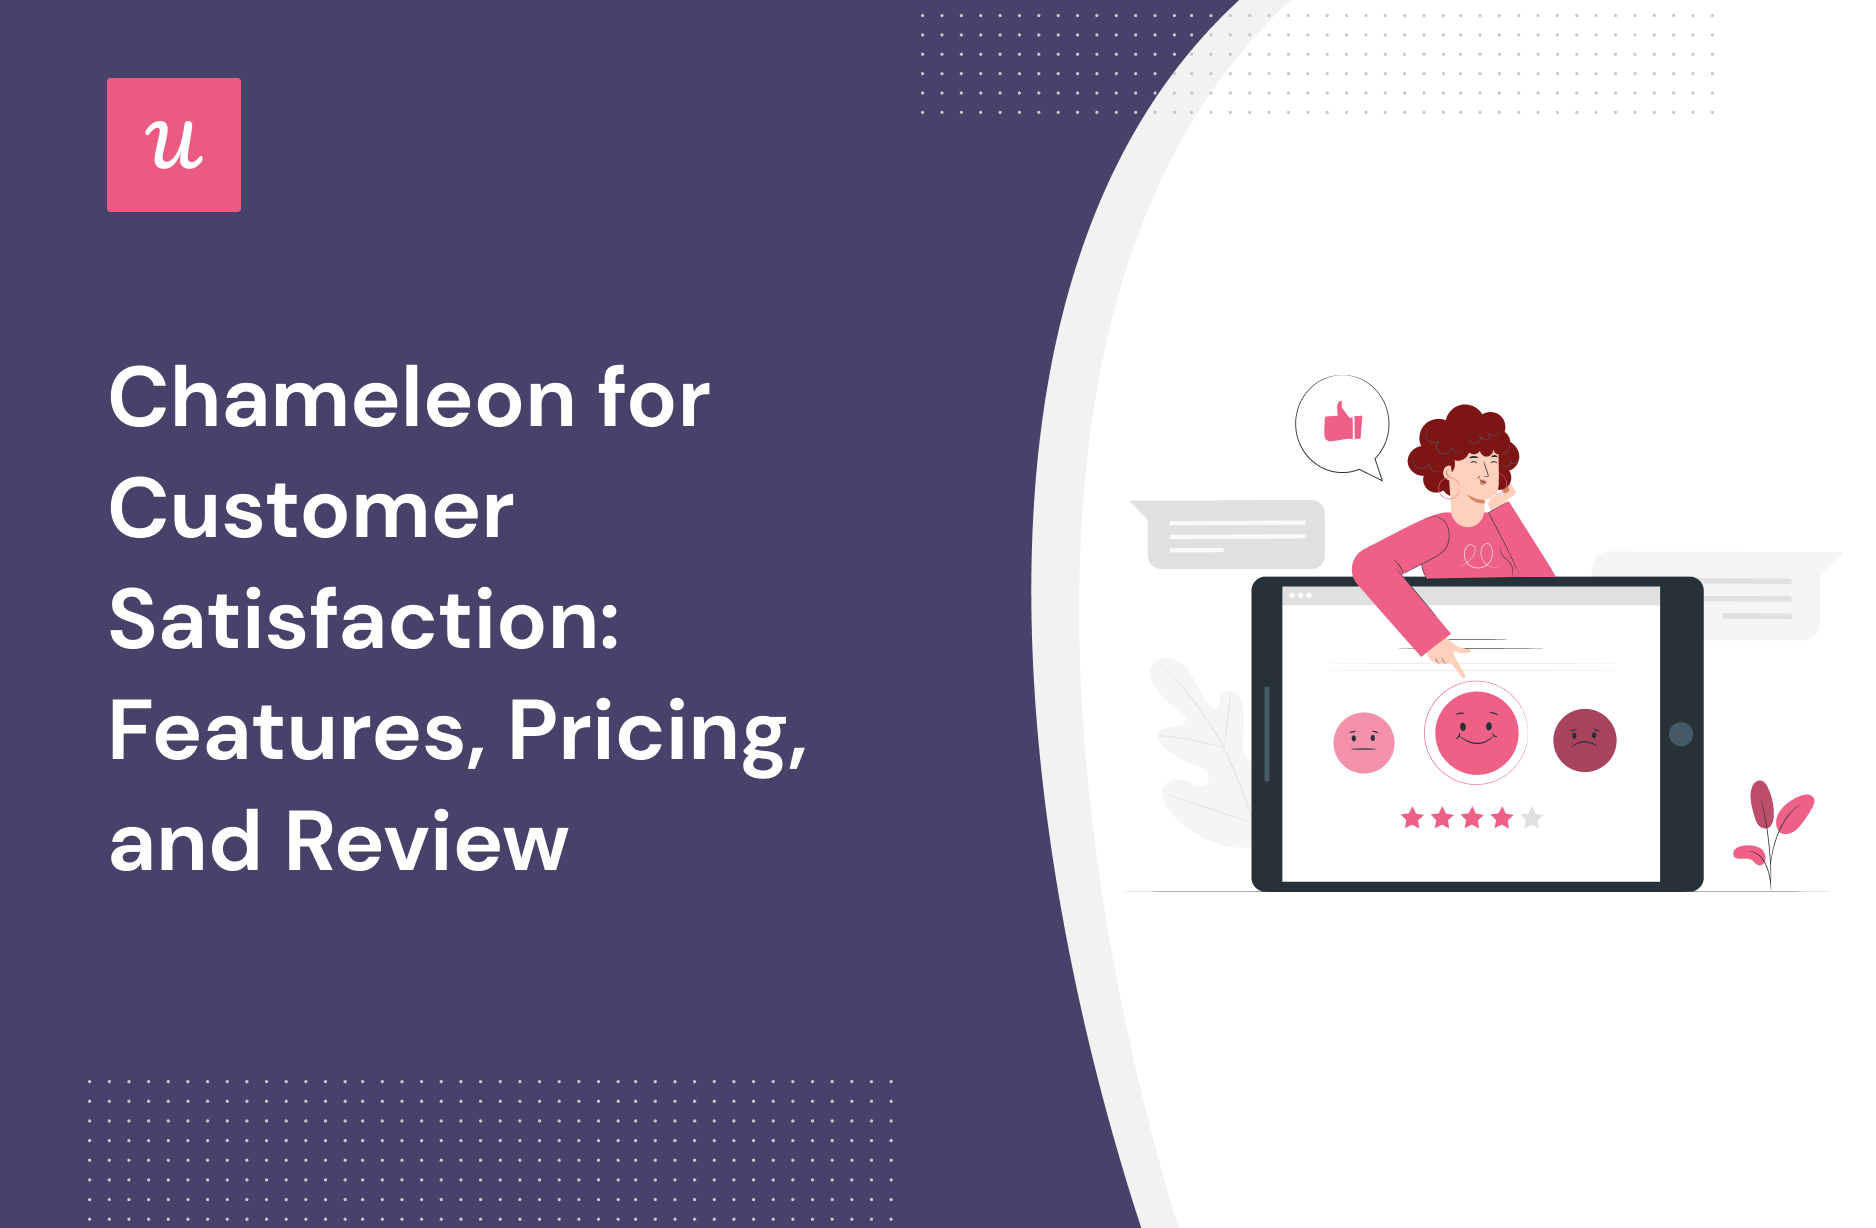 Chameleon for Customer Satisfaction: Features, Pricing, and Review